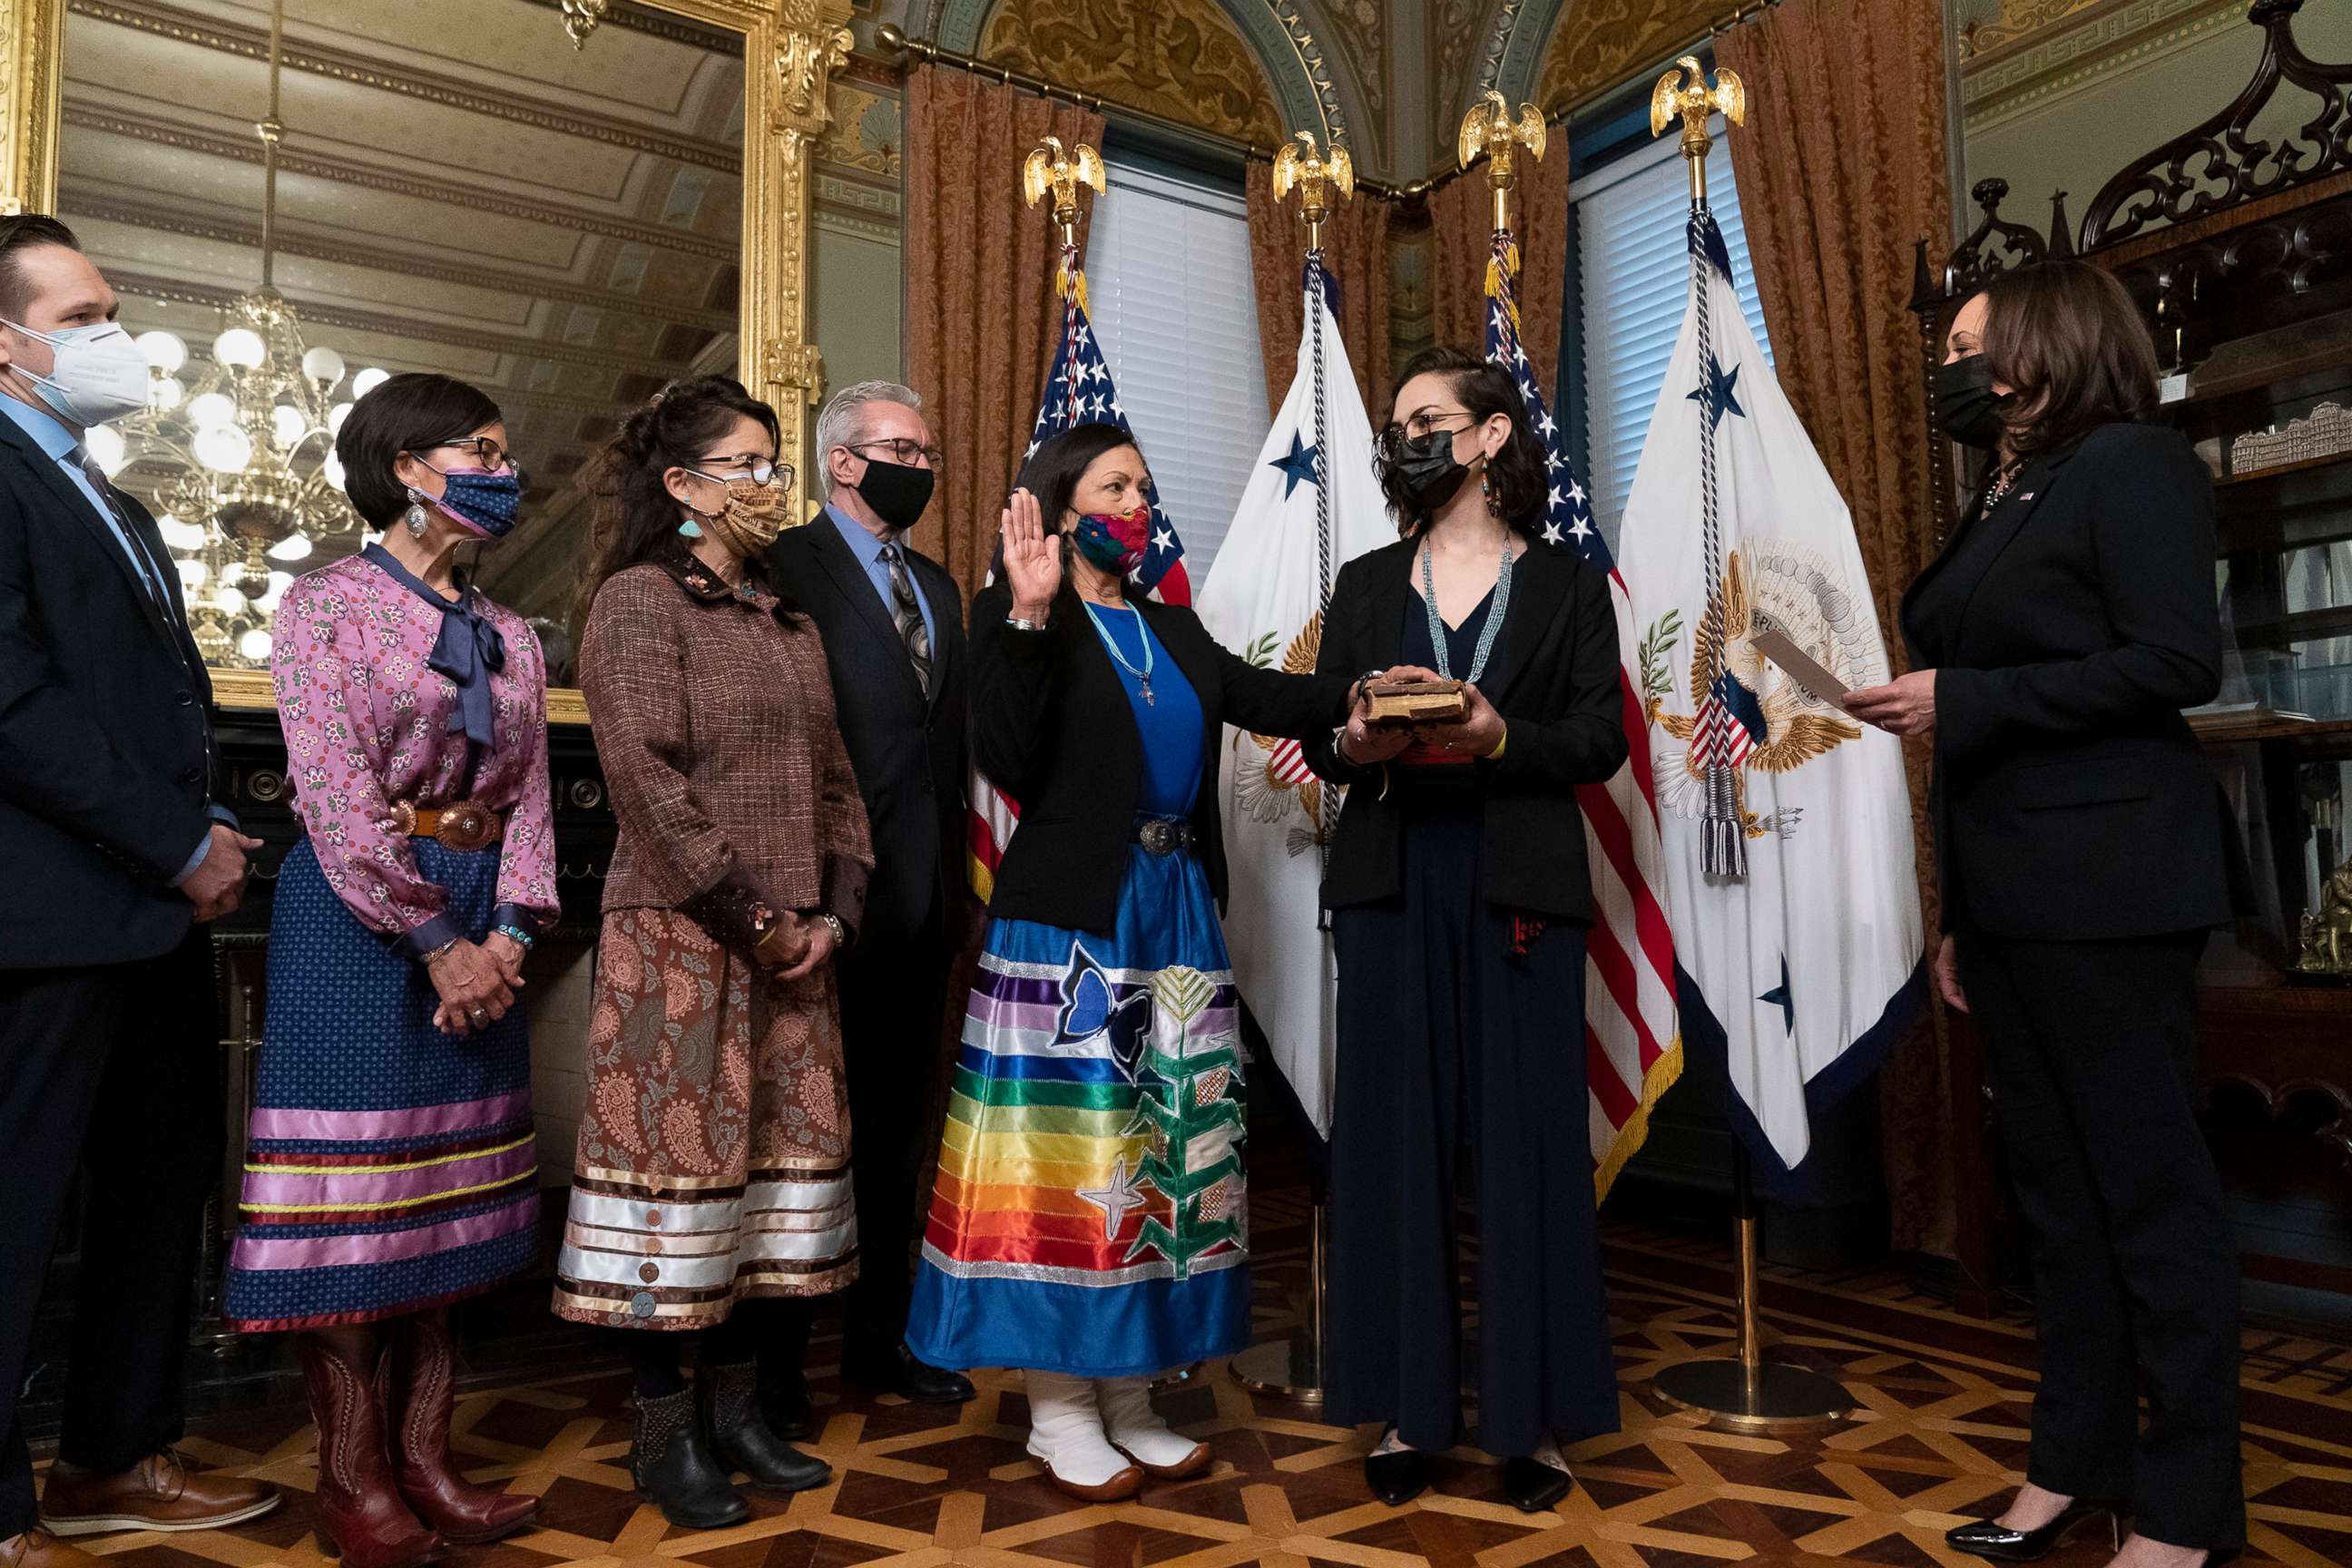 PHOTO: Vice President Kamala Harris, right, speaks during a ceremonial swearing in for Interior Secretary Deb Haaland, third from right, in the Eisenhower Executive Office Building, March 18, 2021, in Washington, D.C.